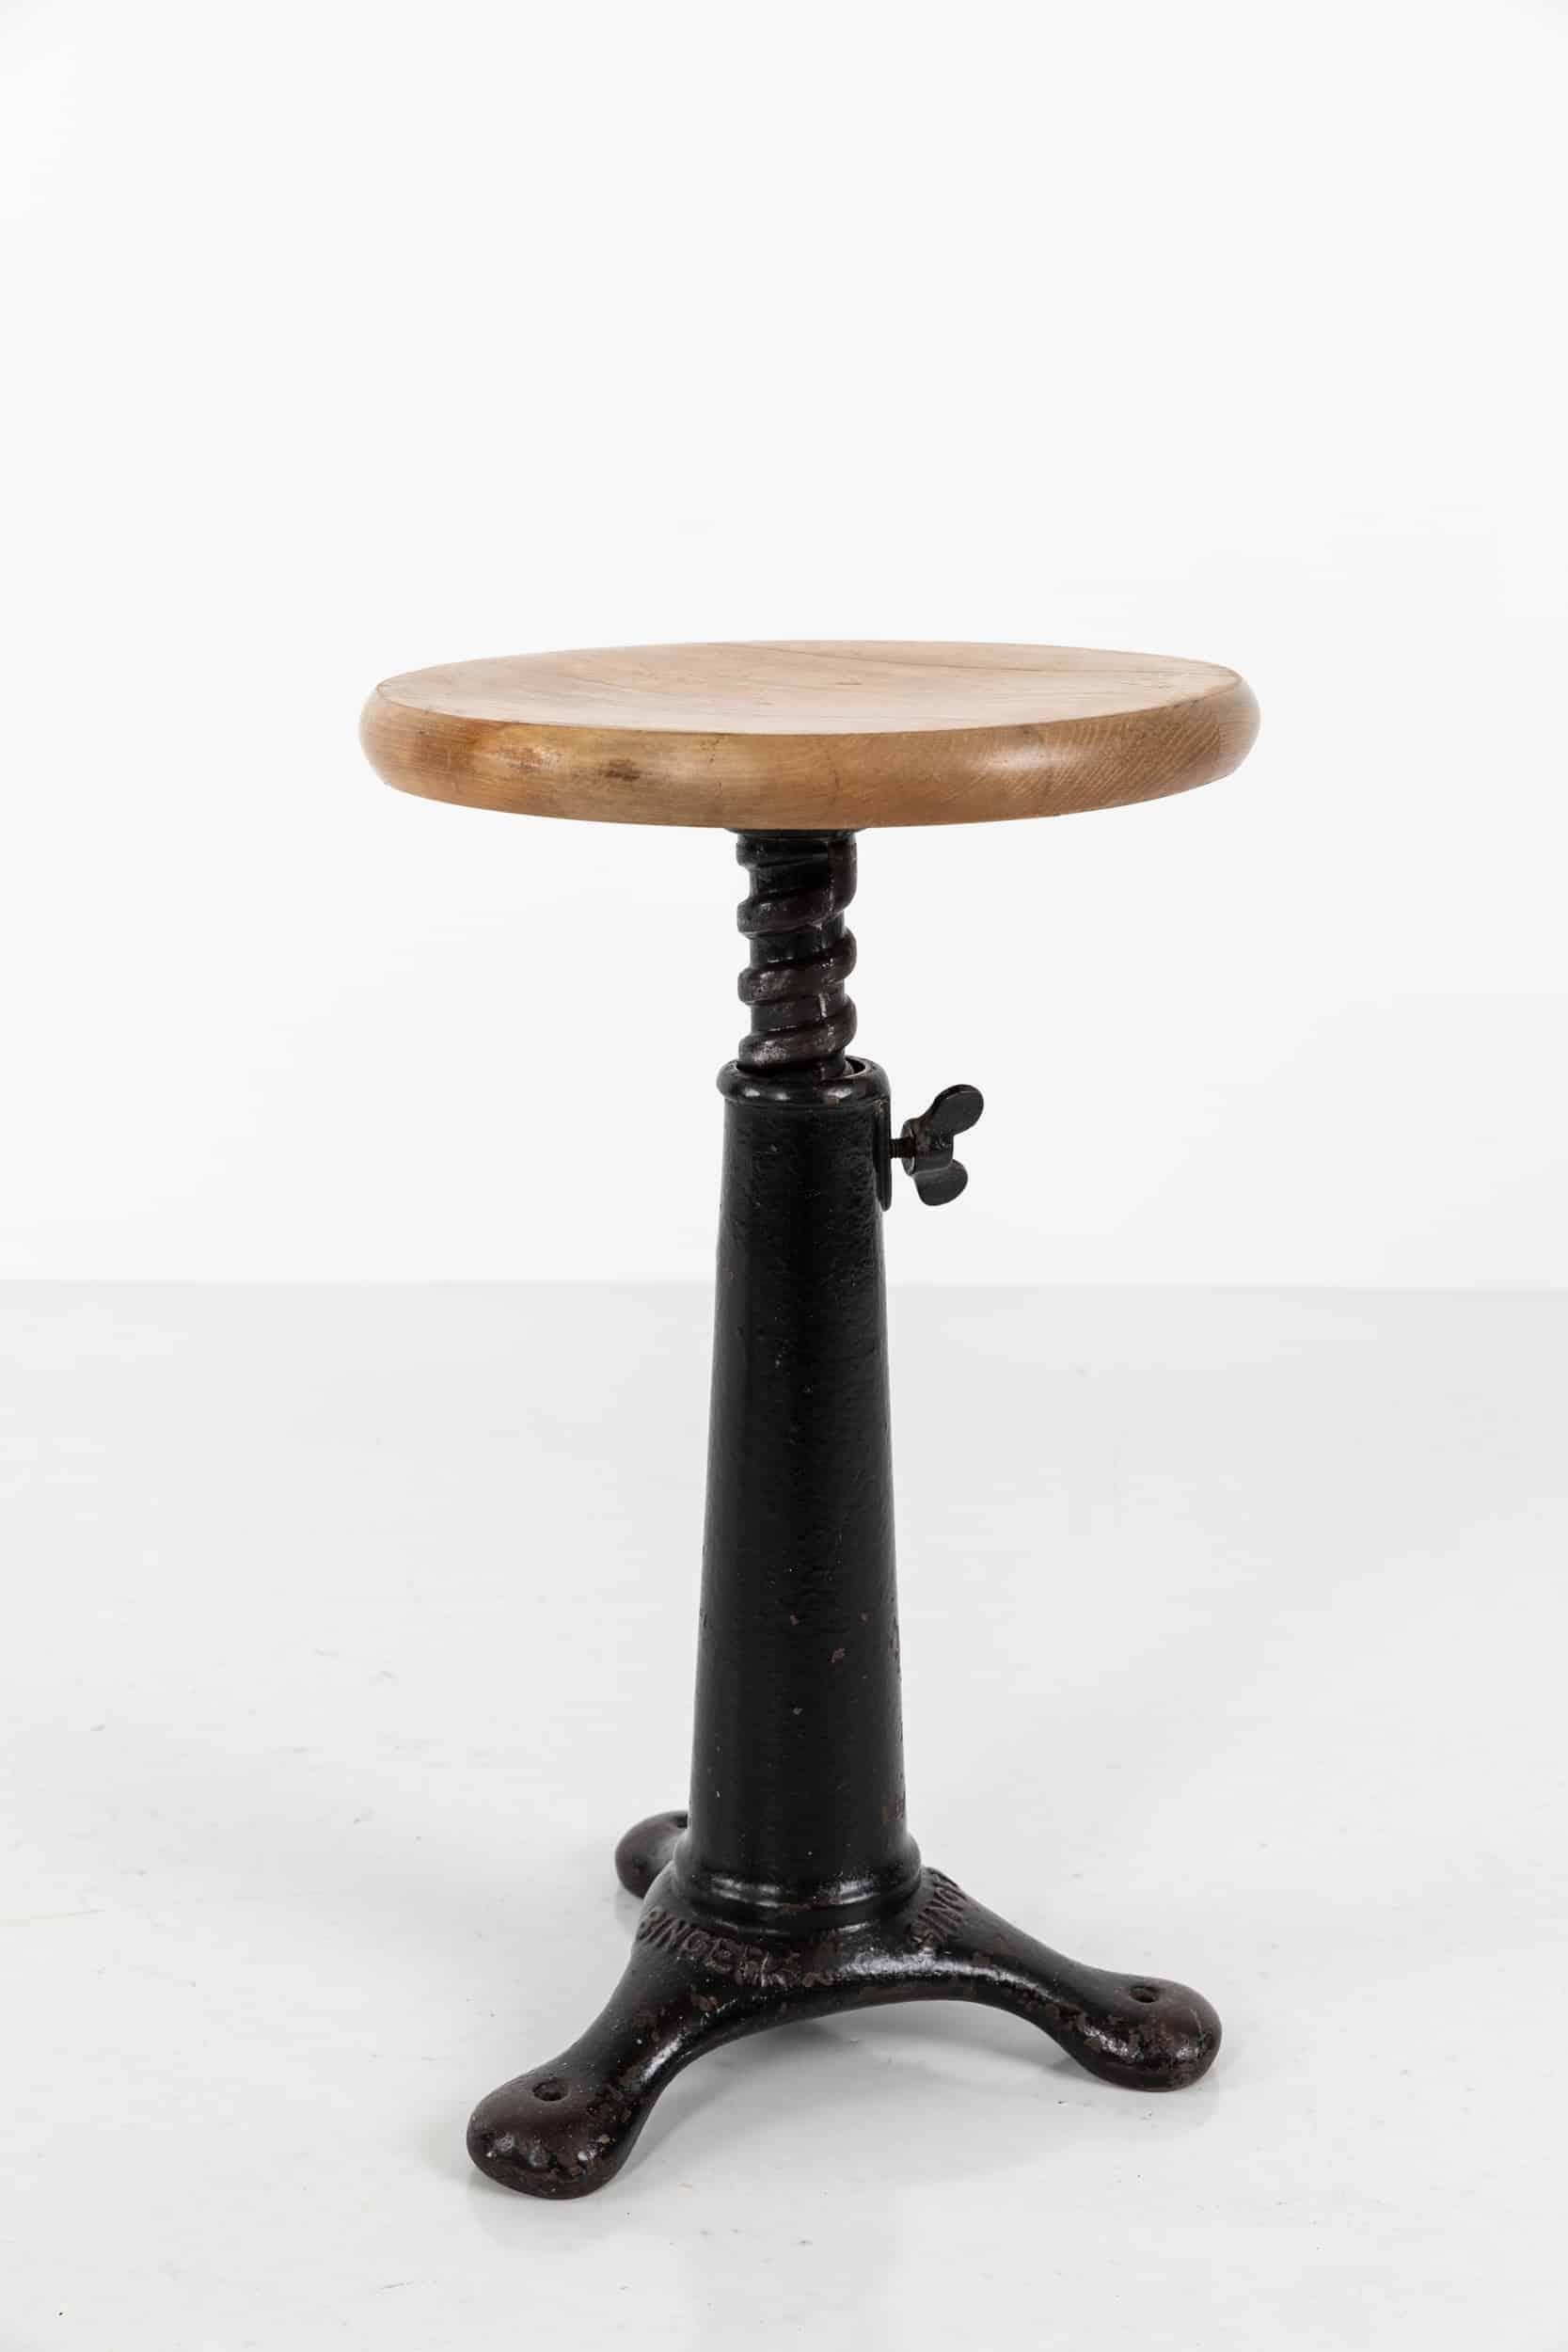 Original example of the iconic 3-legged Singer sewing stool. c.1930

Originally, these stools lined factory floors, and were adapted over time to make them more comfortable for workers. In original condition with hardwood seat top. Height